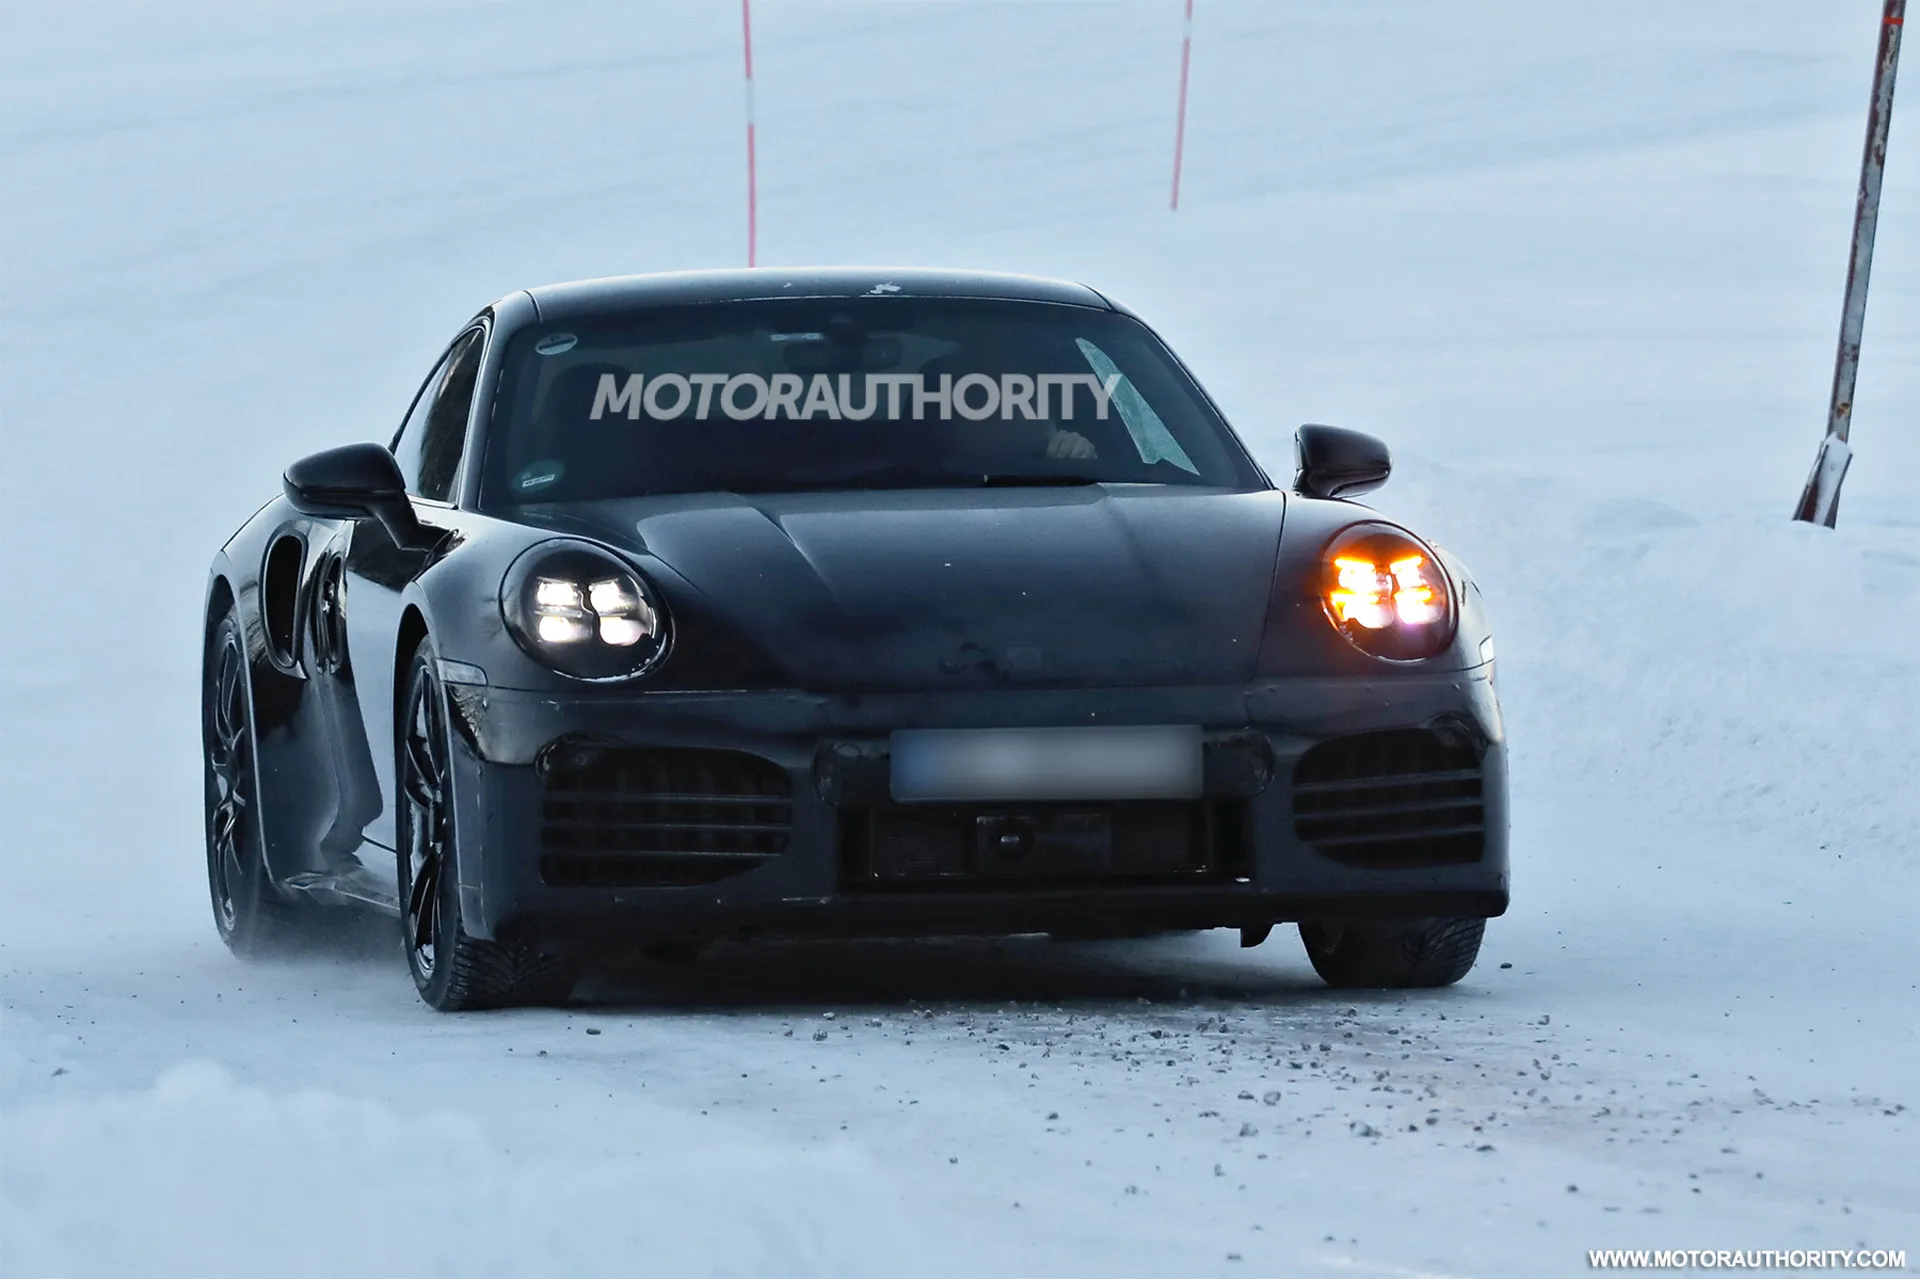 2025 Porsche 911 Turbo spied: Mid-cycle update on the way